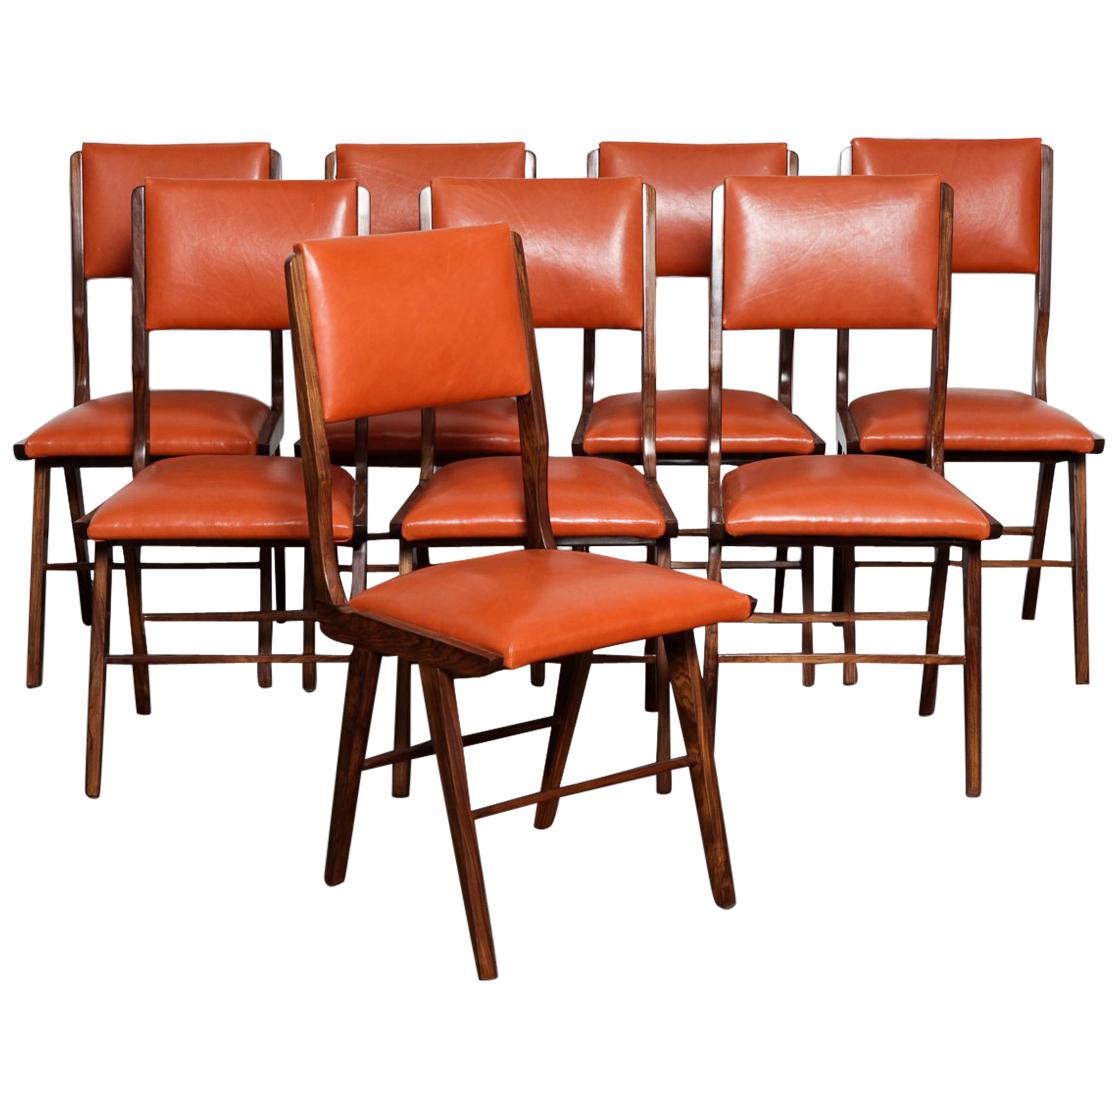 Set of 8 Brazilian Solid Rosewood Tall Back Dining Chairs in Leather